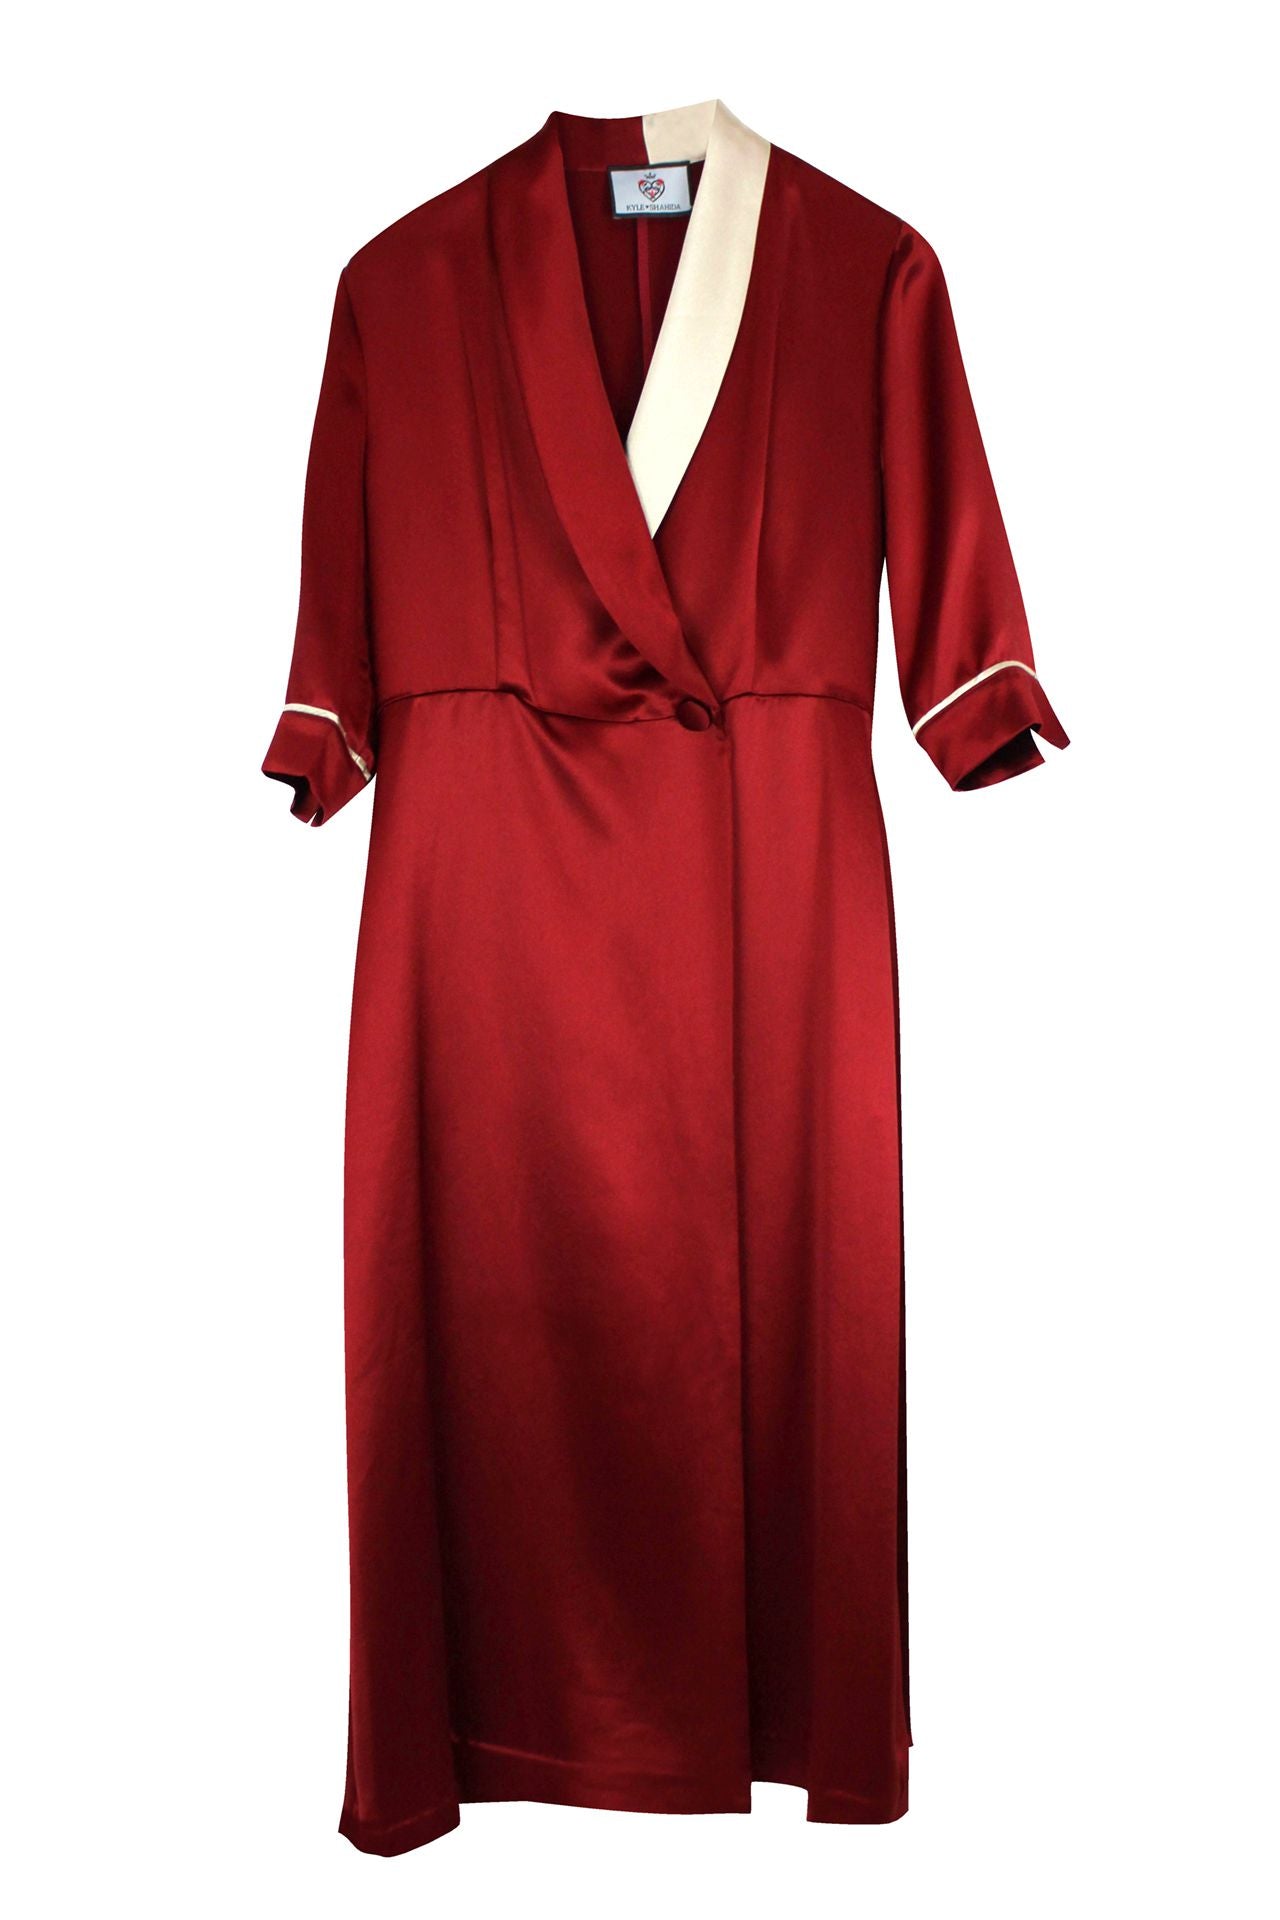 Belted-Robe-Dress-In-Red-By-Kyle-Richard